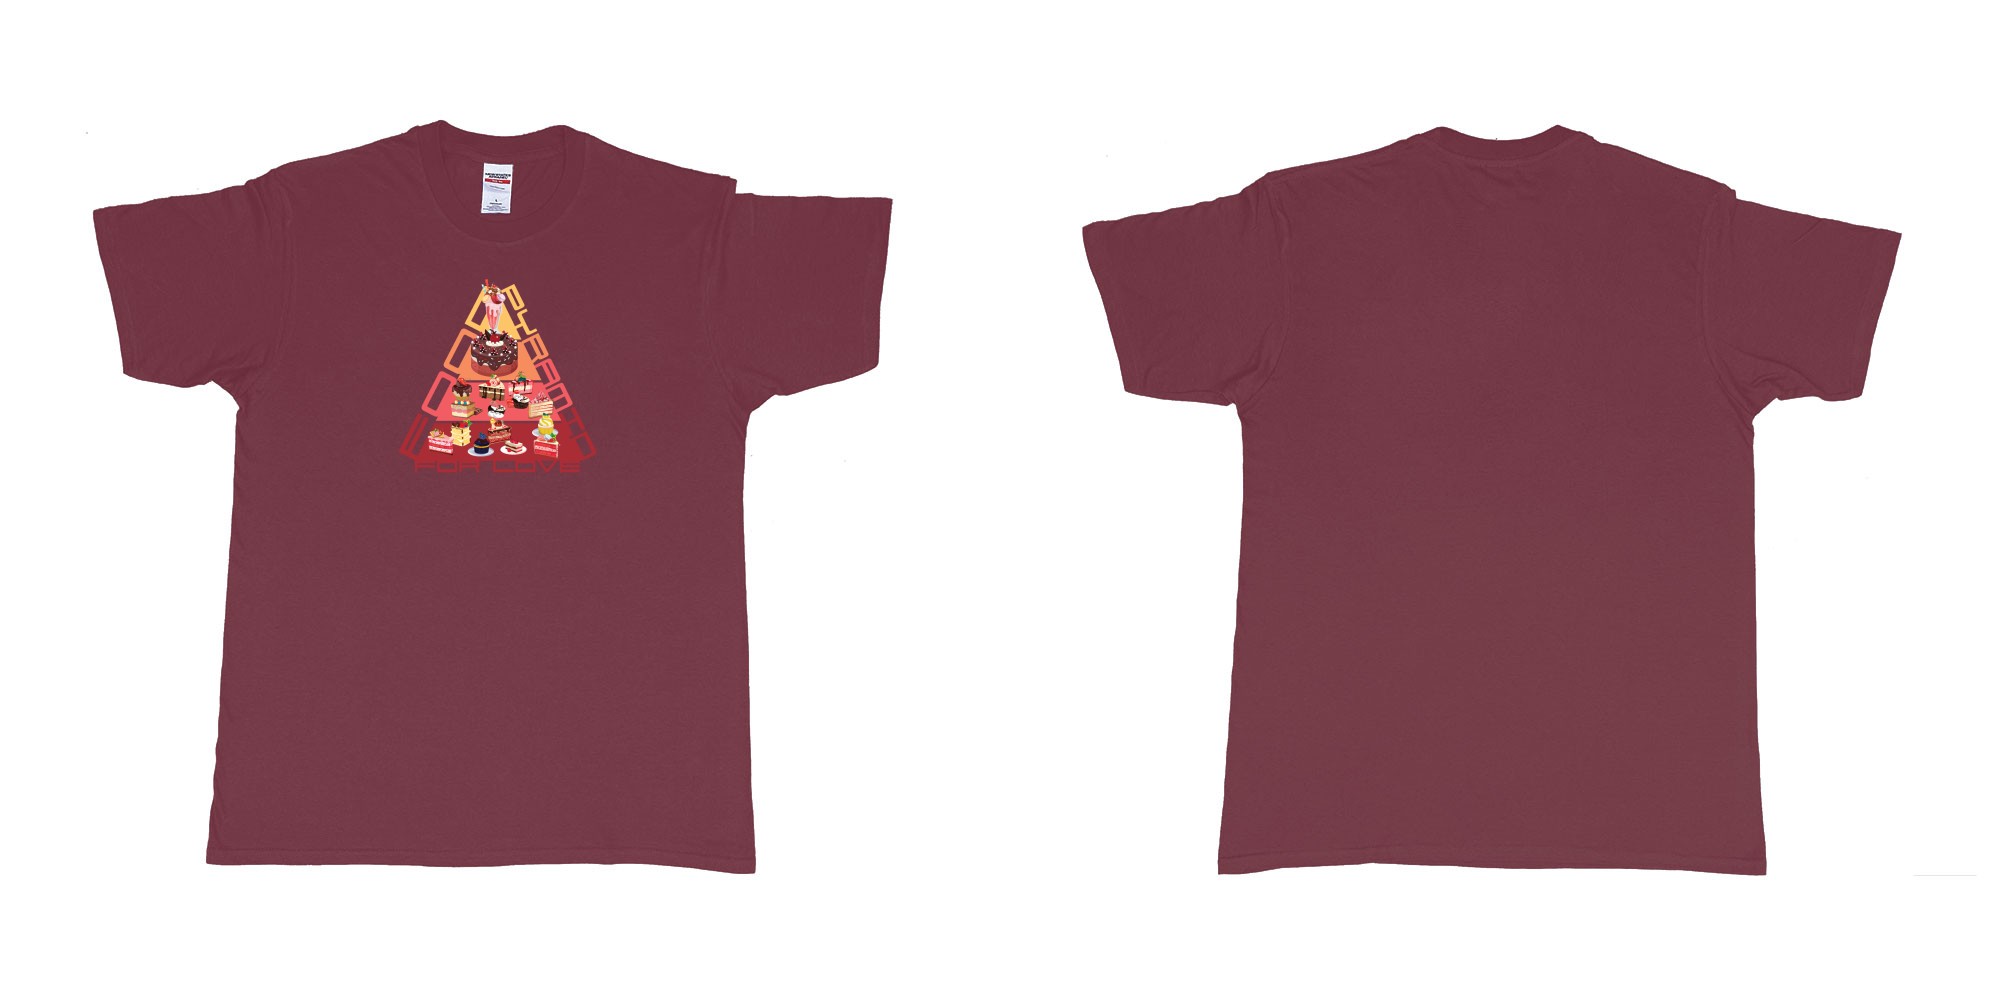 Custom tshirt design food pyramid for love in fabric color marron choice your own text made in Bali by The Pirate Way